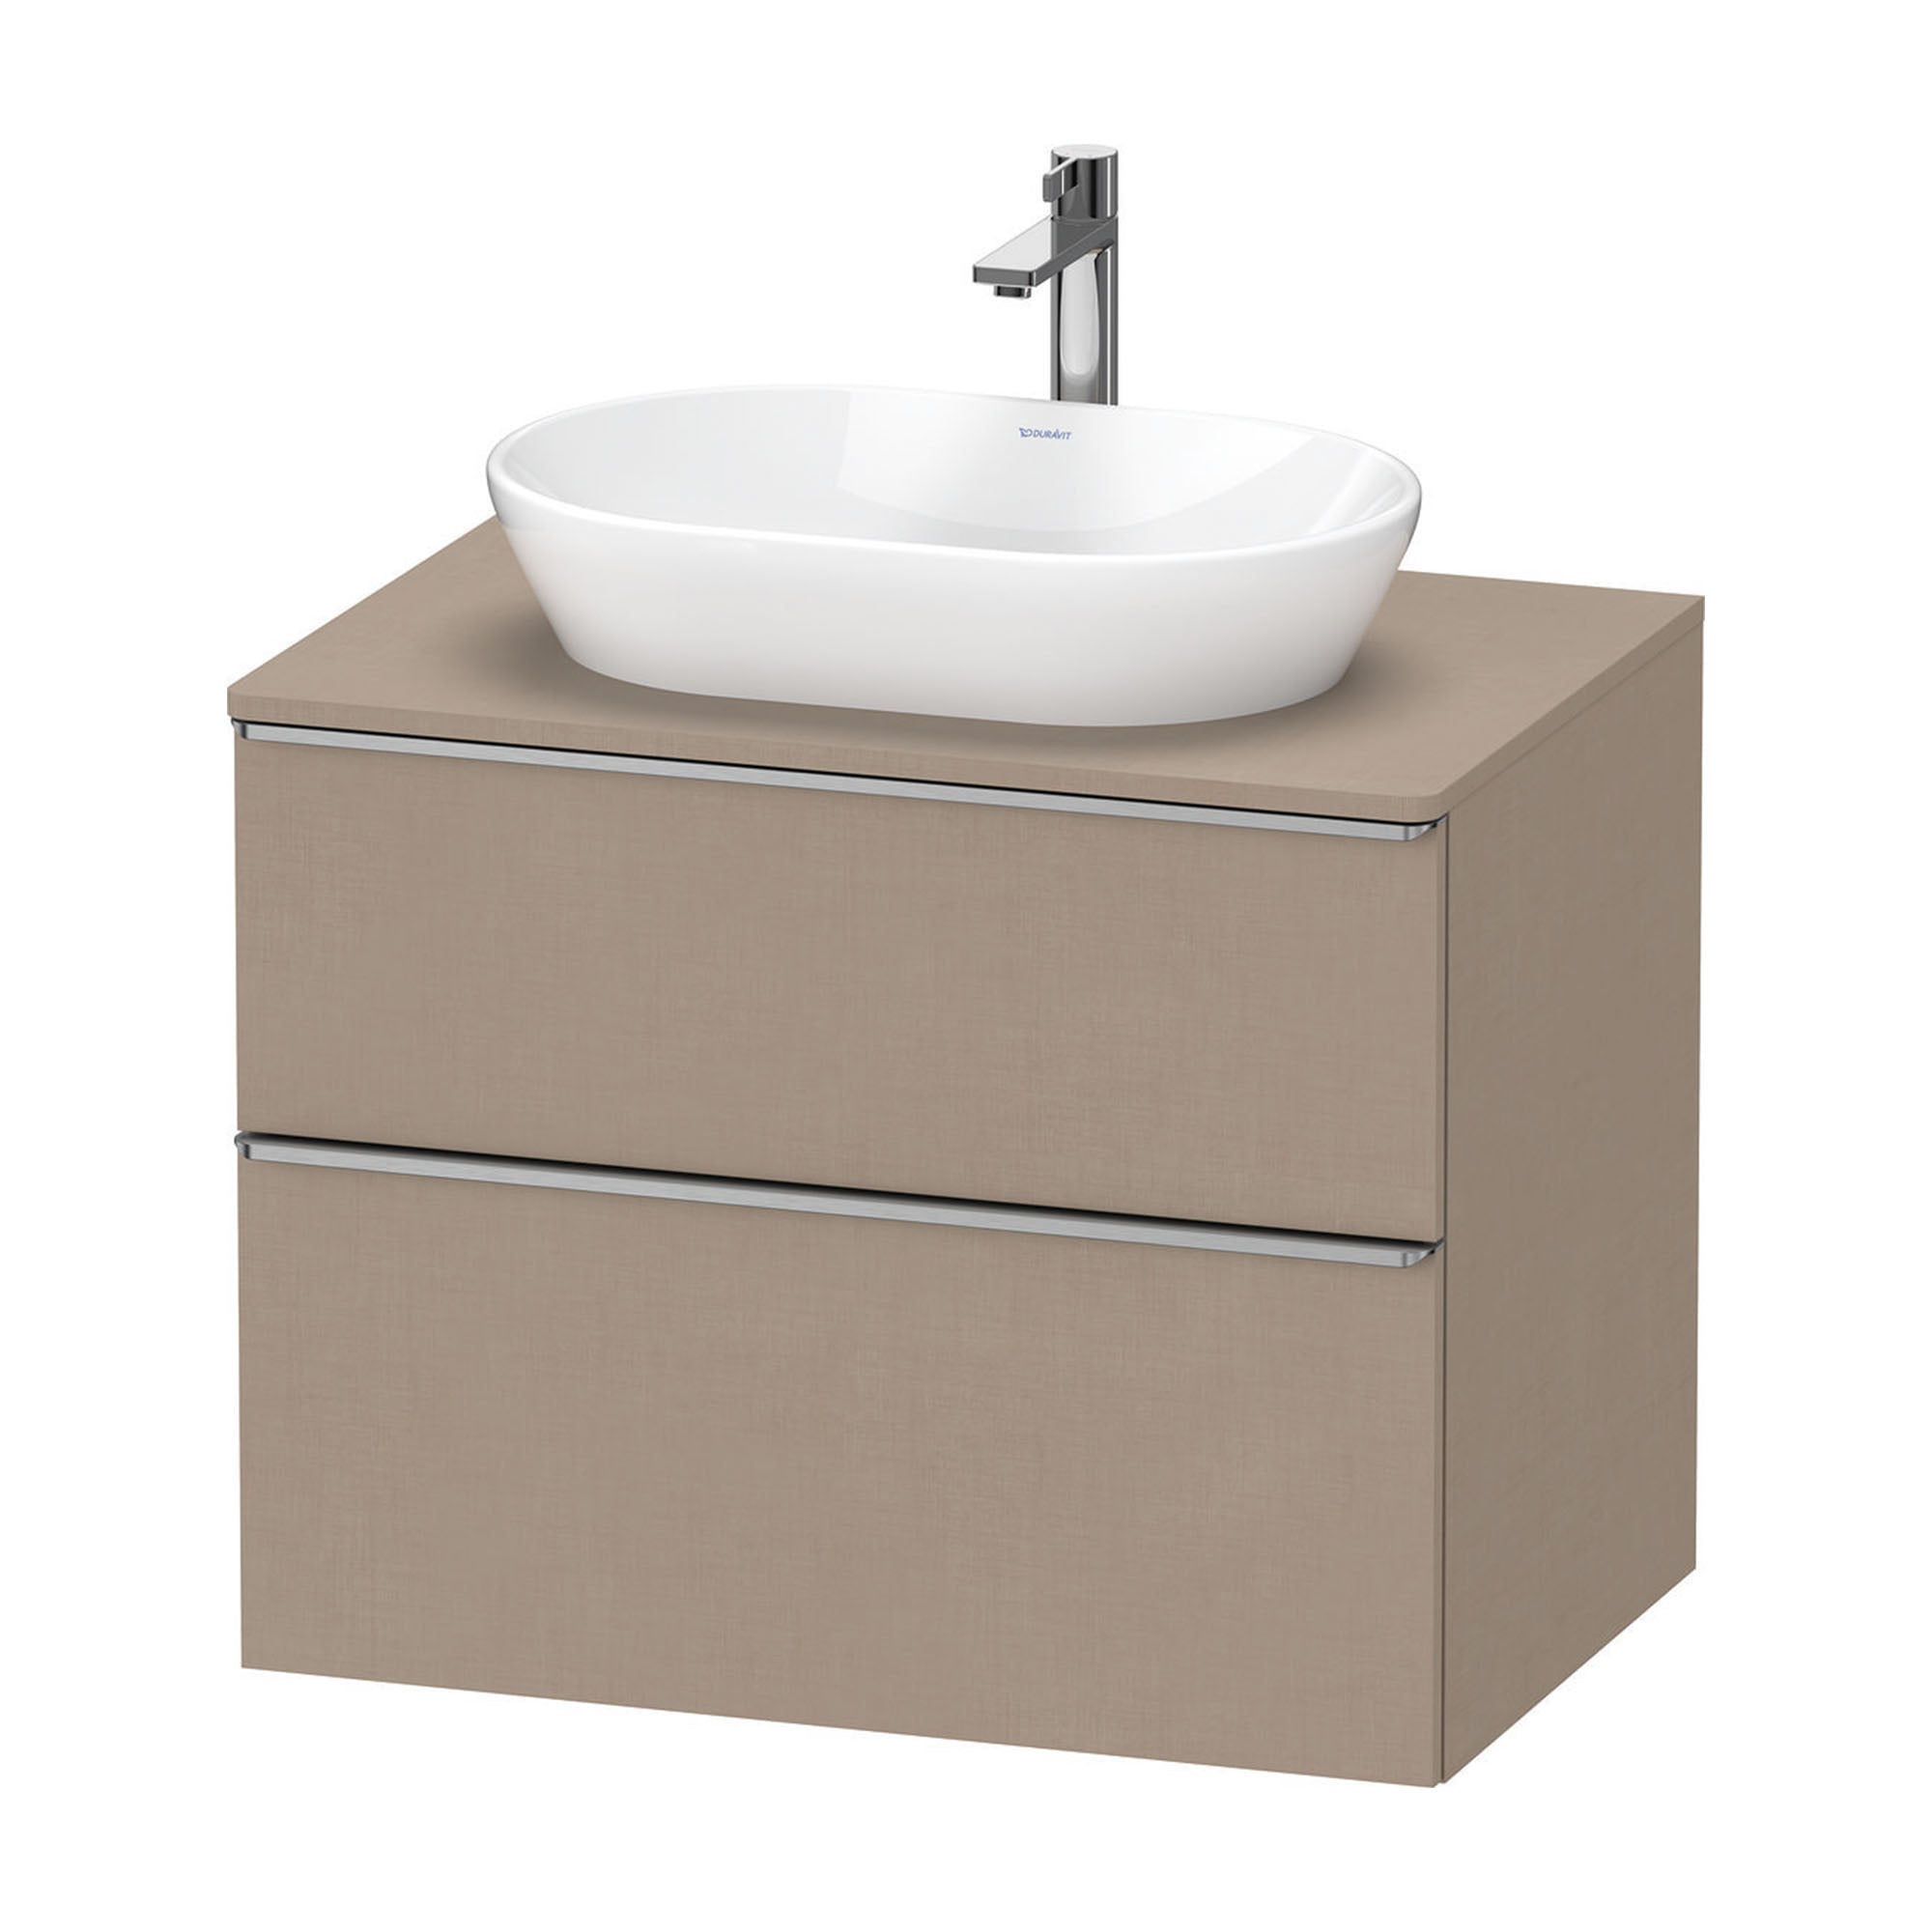 duravit d-neo 800 wall mounted vanity unit with worktop linen stainless steel handles